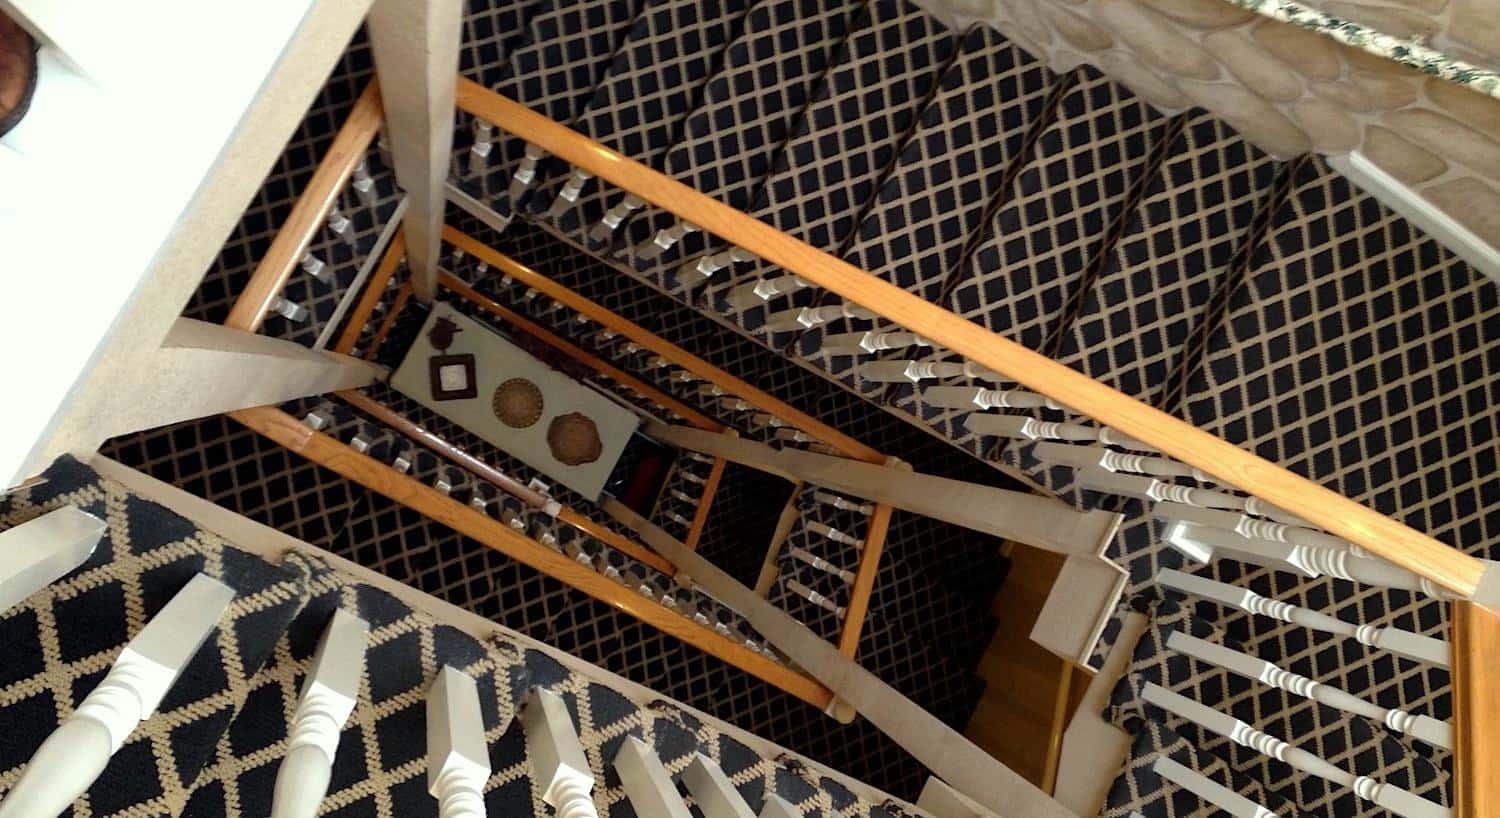 View from the top down of painted white spindel railing and carpeted staircase with multiple levels